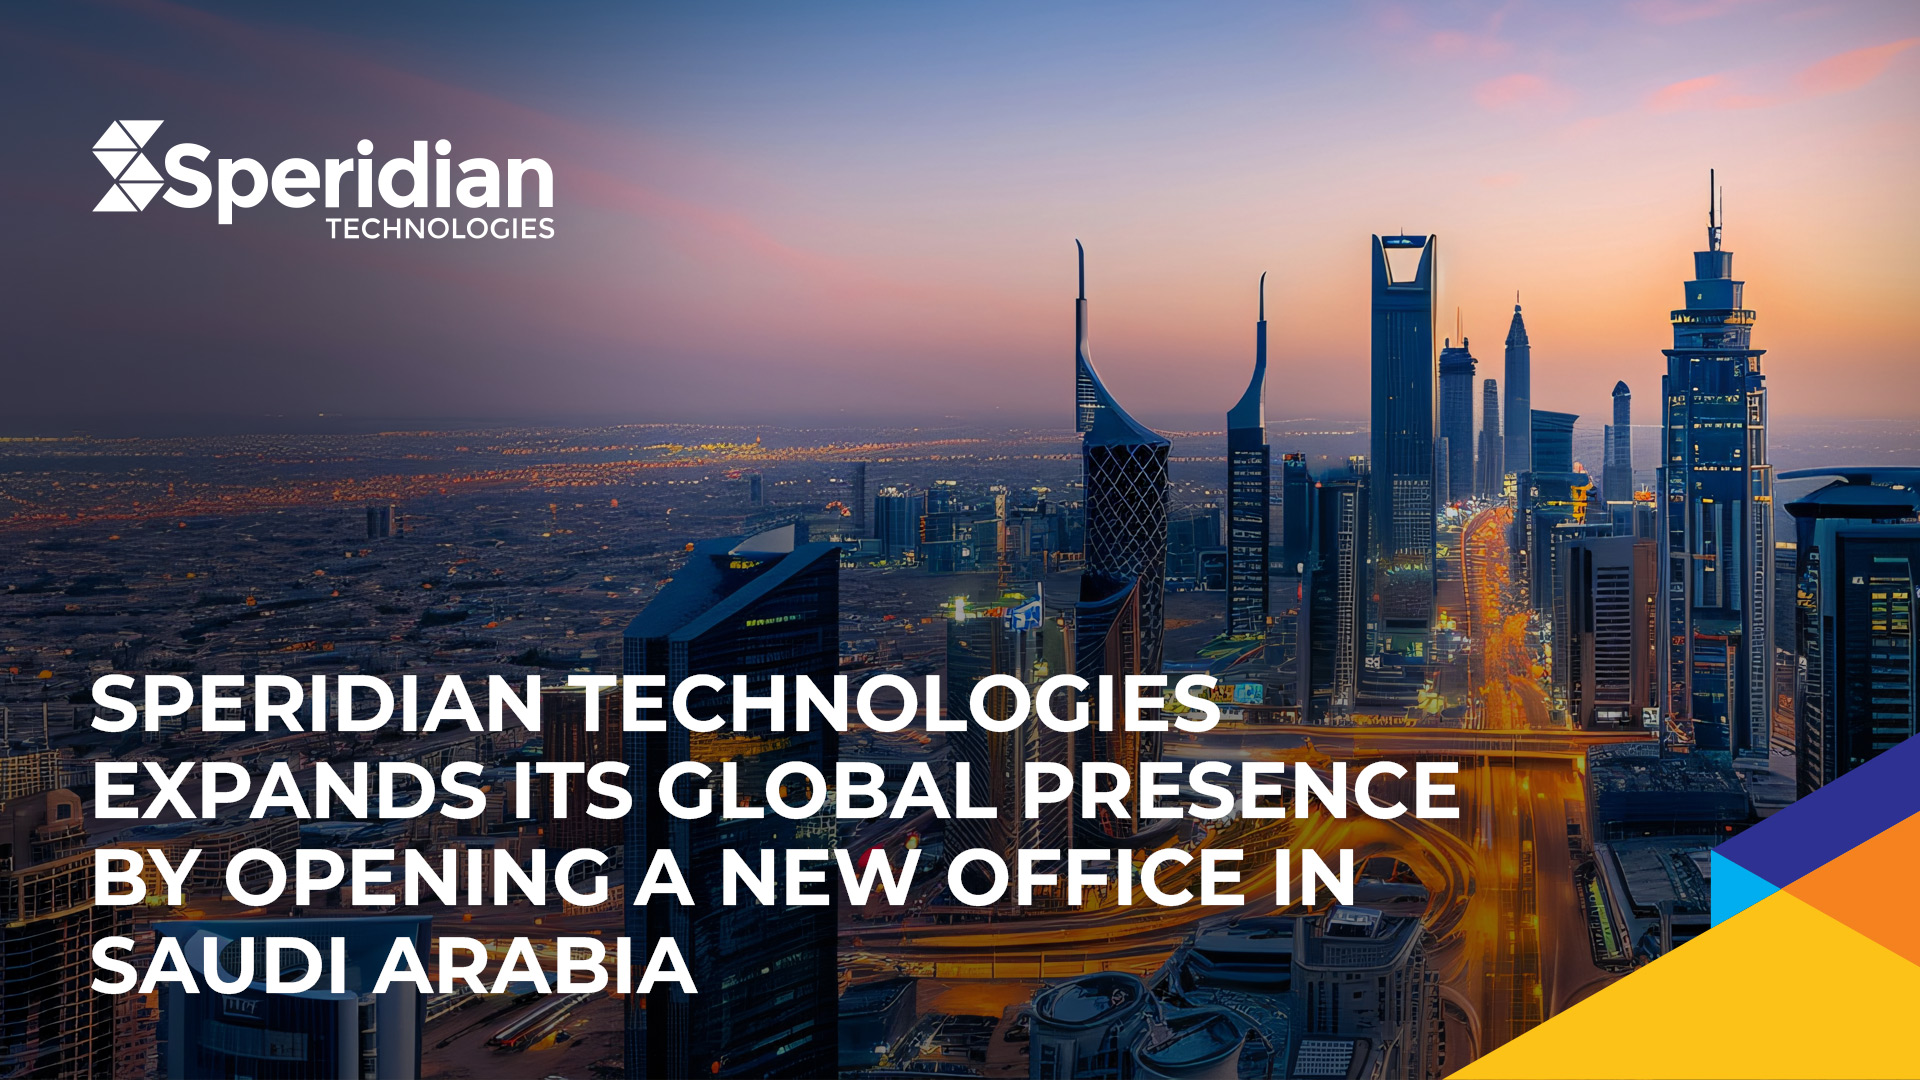 Speridian Technologies Expands its Global Presence by Opening a New Office in Saudi Arabia